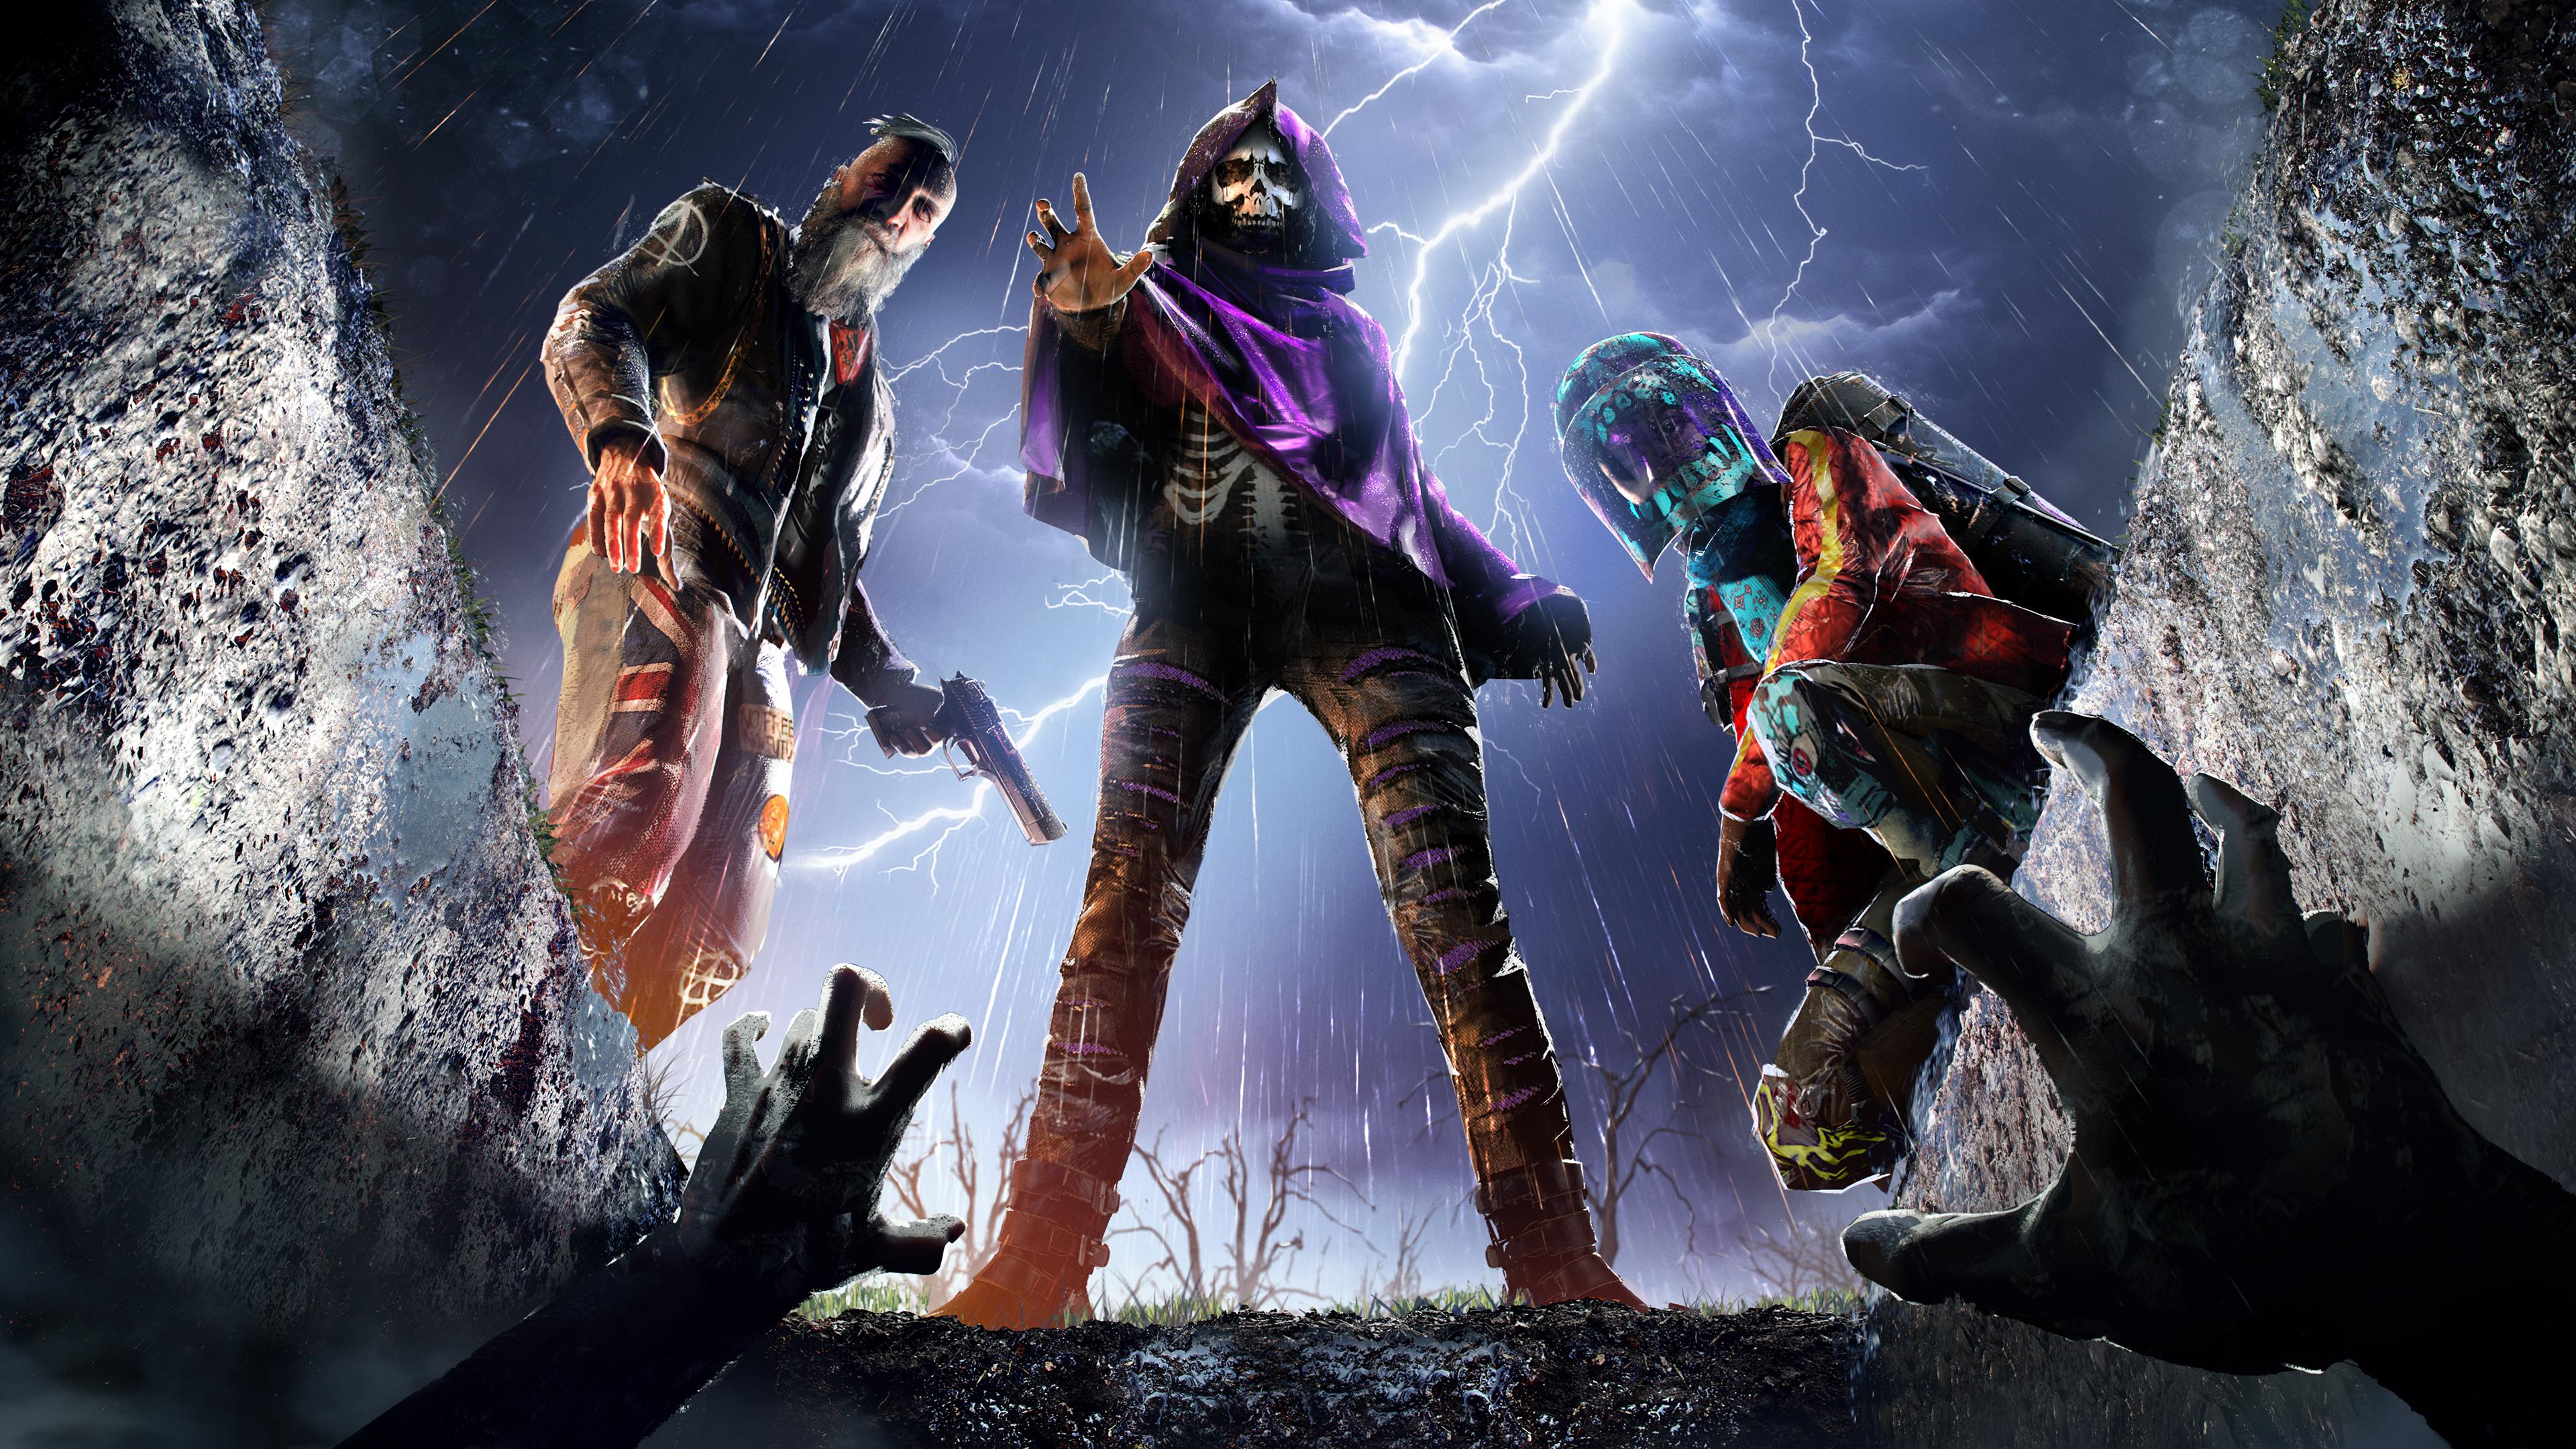 Watch Dogs News Three New Prestige Operatives Have Been Added To The Store Today Watchdogslegion The Horseman The Reaper Death Bundle Costs 2 000 Wd Credits Individual Operatives Cost 1 100 Credits Twitter